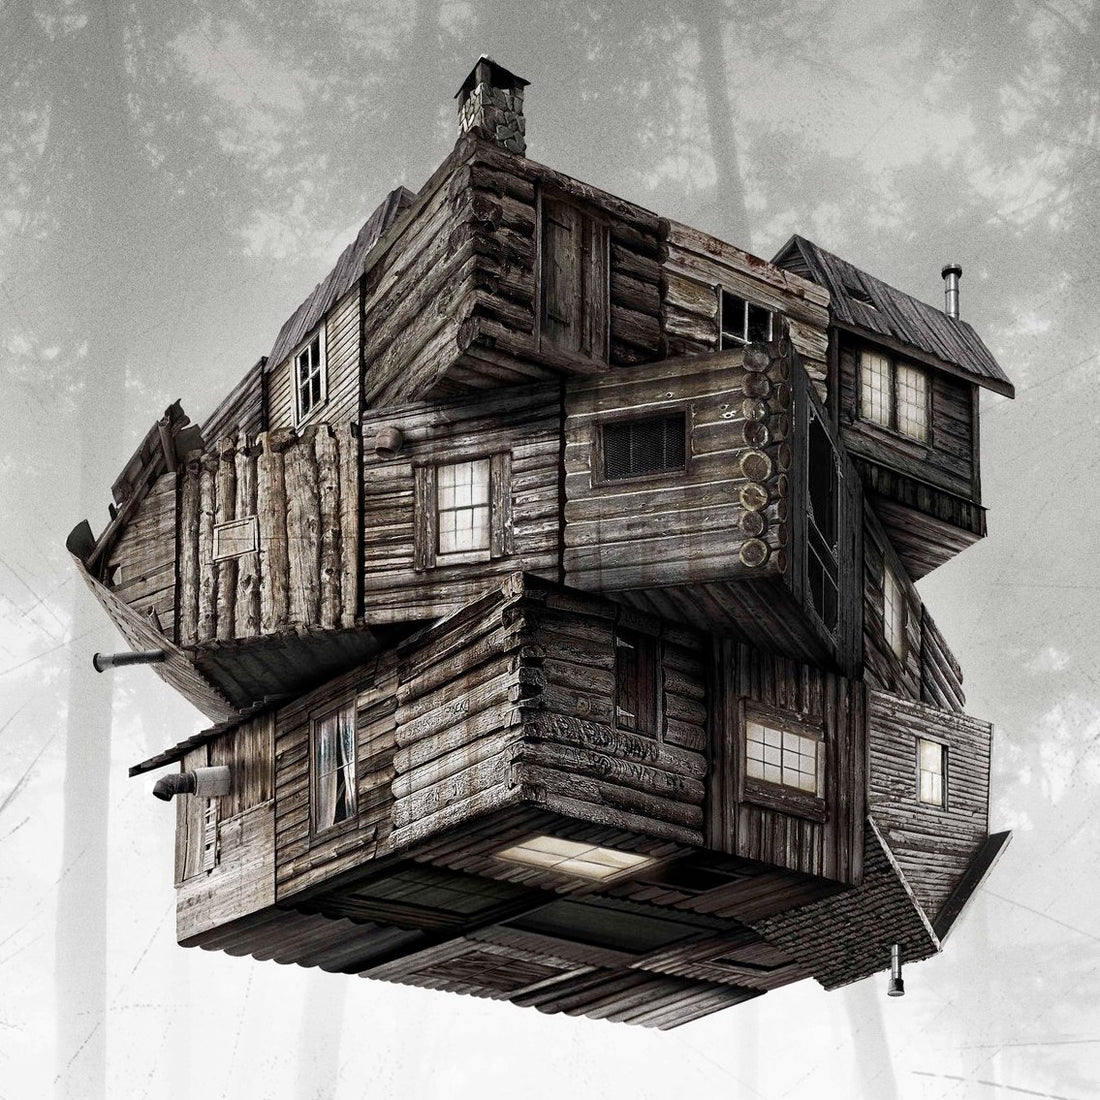 Episode 246: The Cabin in the Woods